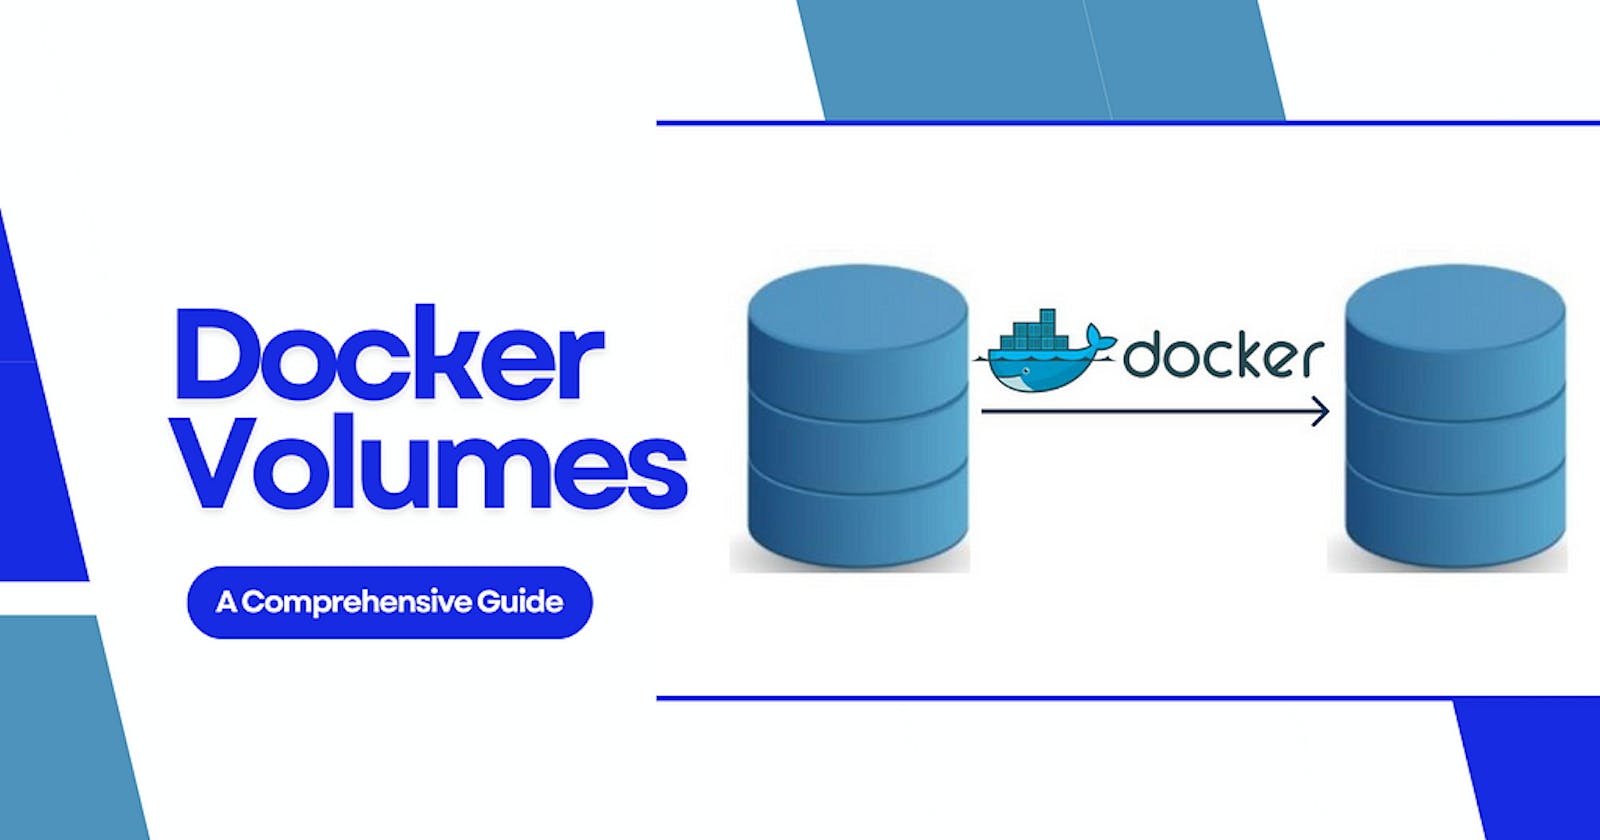 A Comprehensive Guide to Docker Volumes